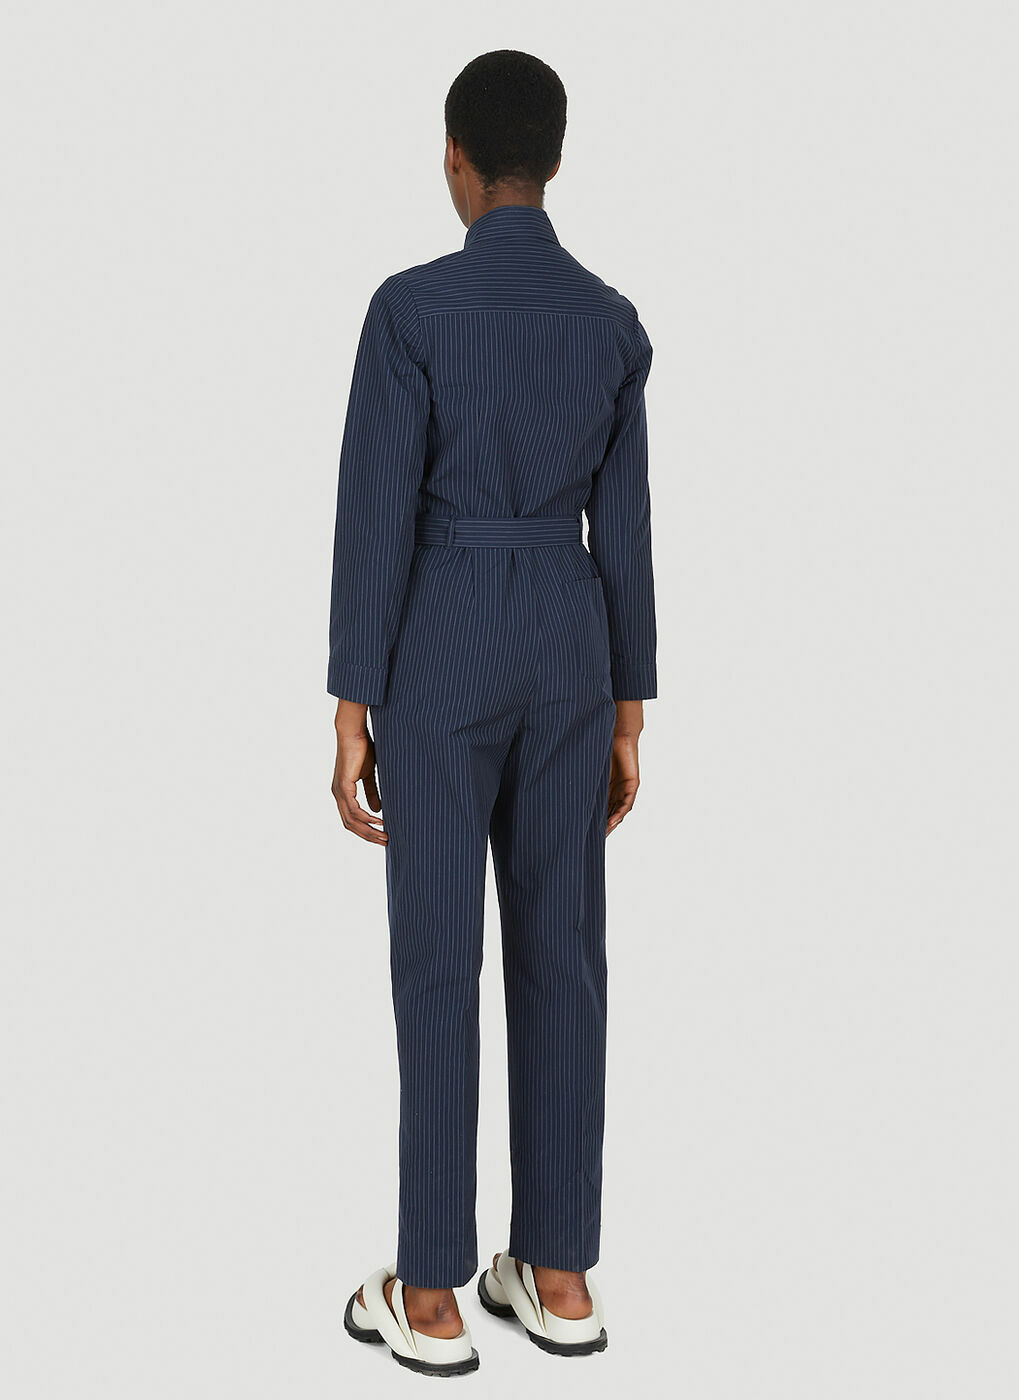 Clementine Jumpsuit in Navy A.P.C.